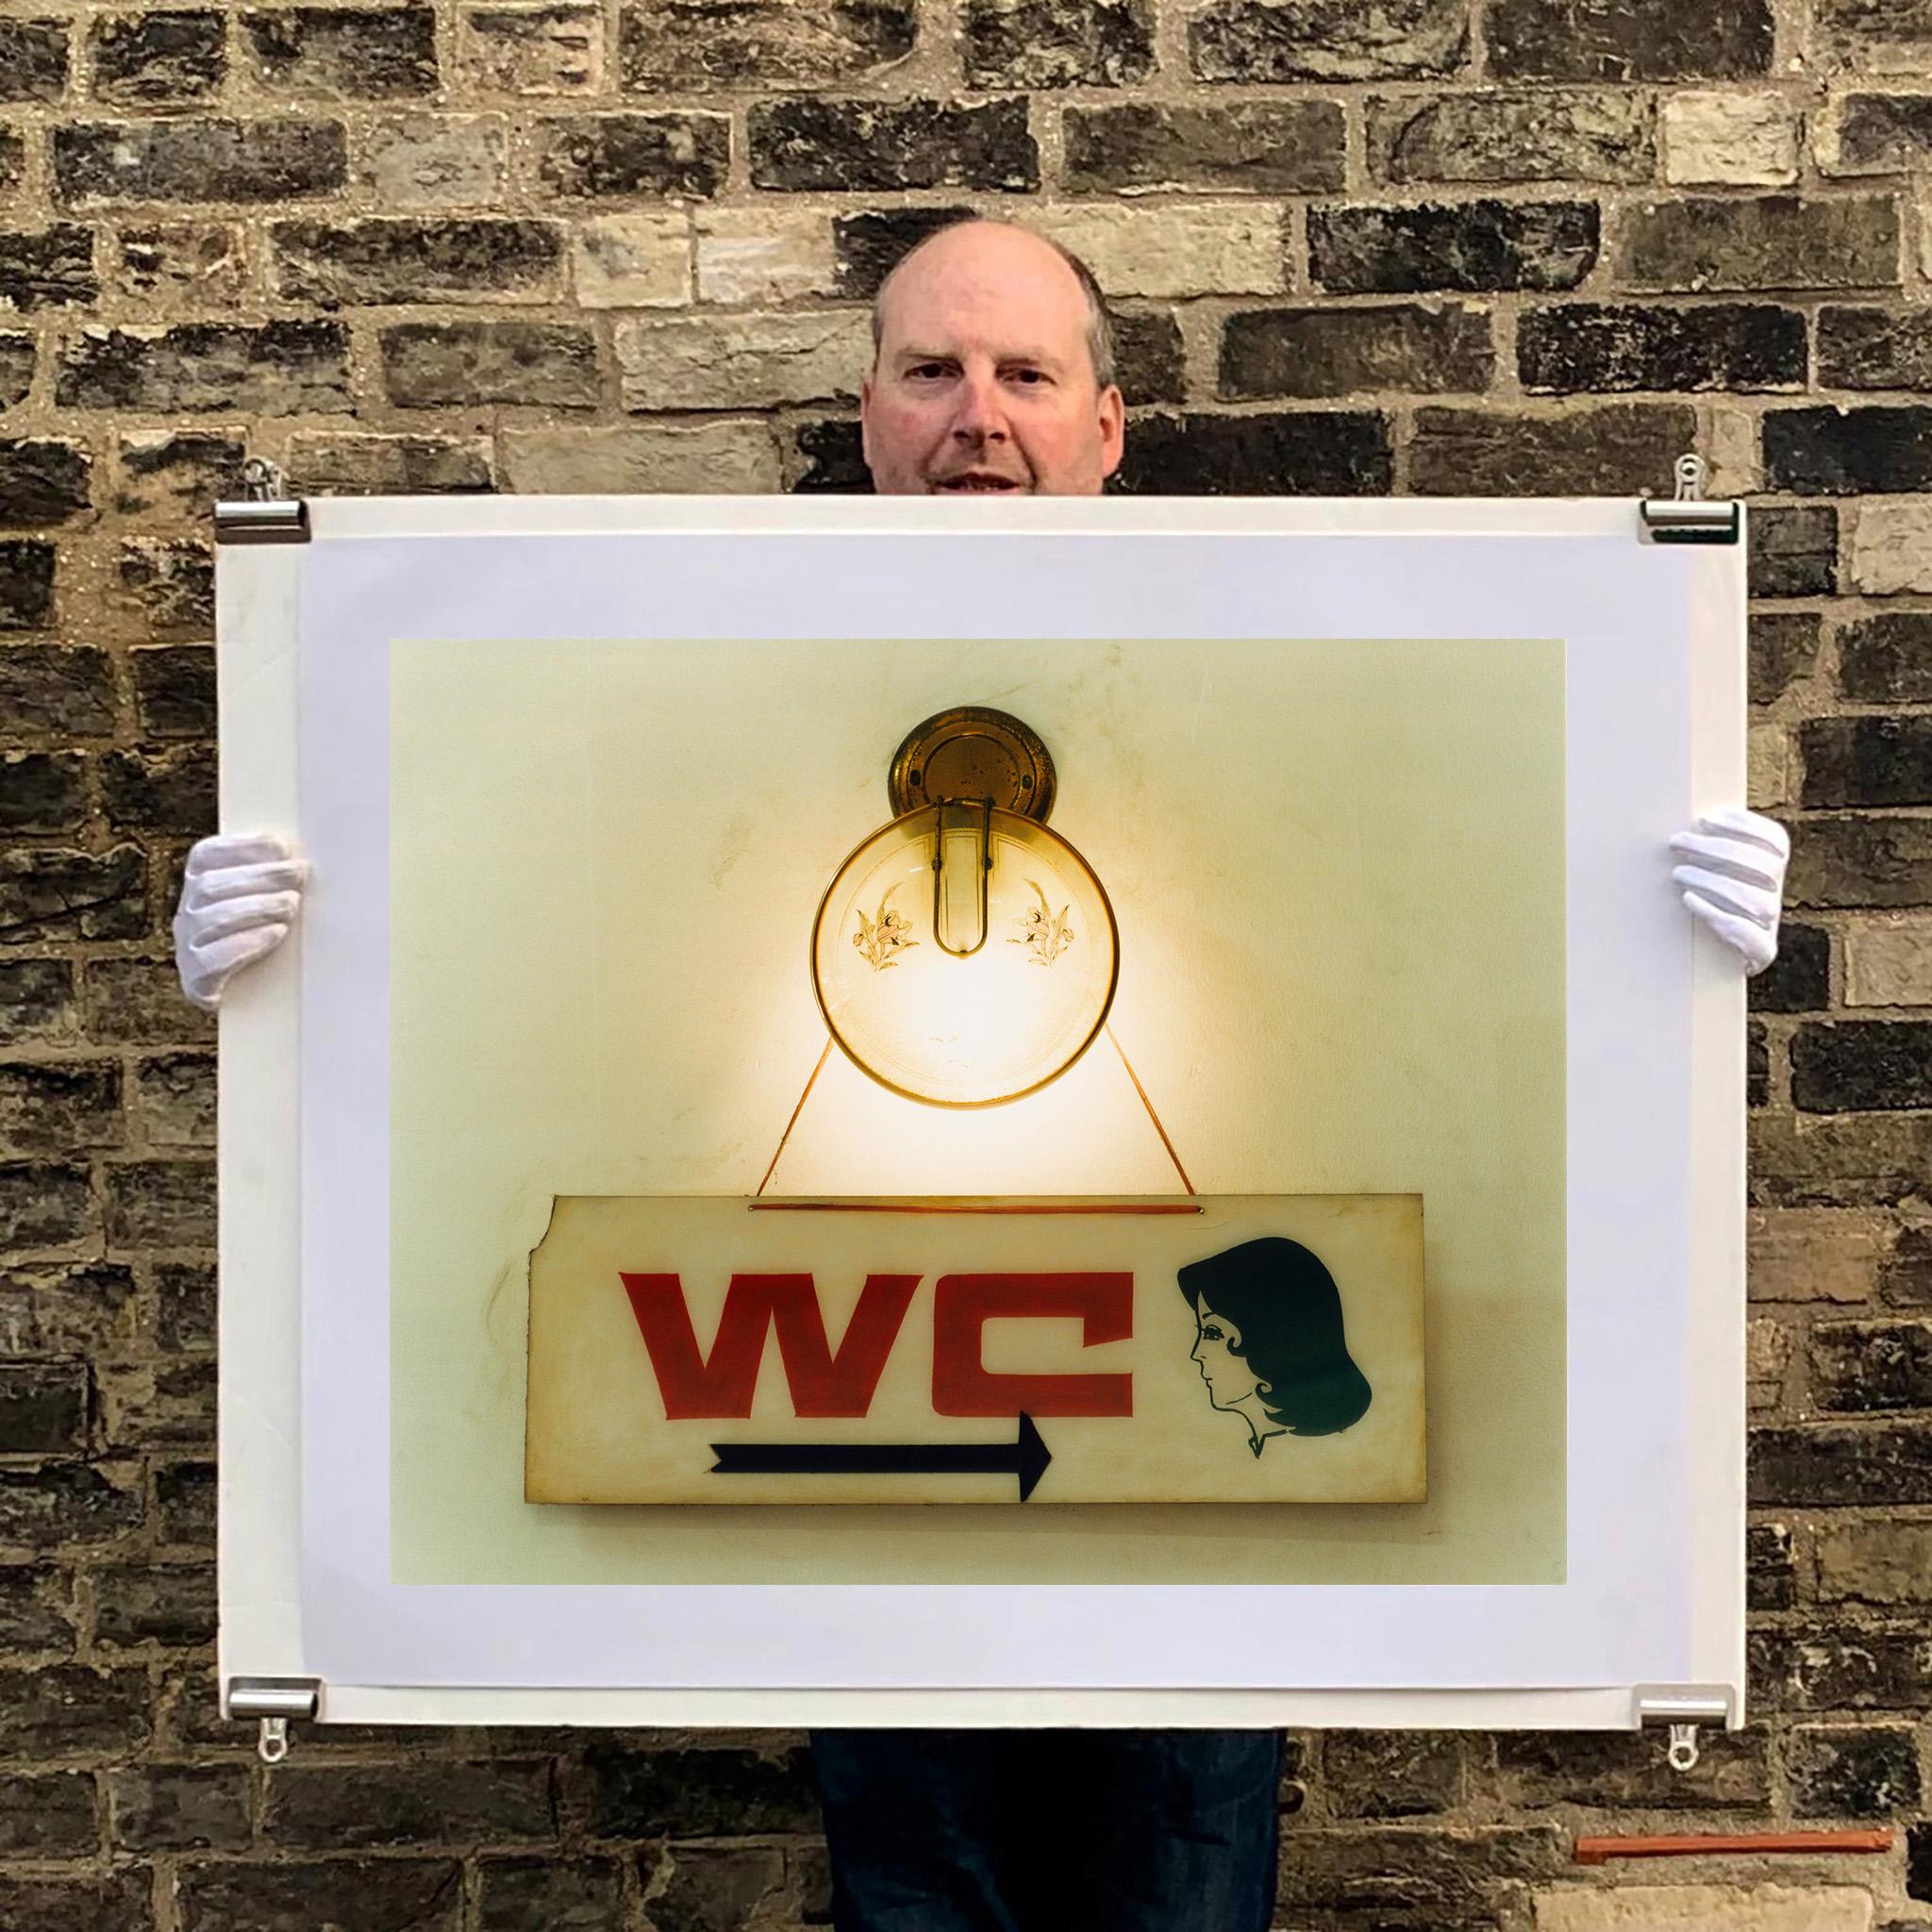 WC, a kitsch vintage sign captured in Ho Chi Minh City, Vietnam. This artwork has a beautiful balance of neutral colour tones, texture and typography.

The artwork is a limited edition of 25 gloss photographic print from negative, accompanied by a